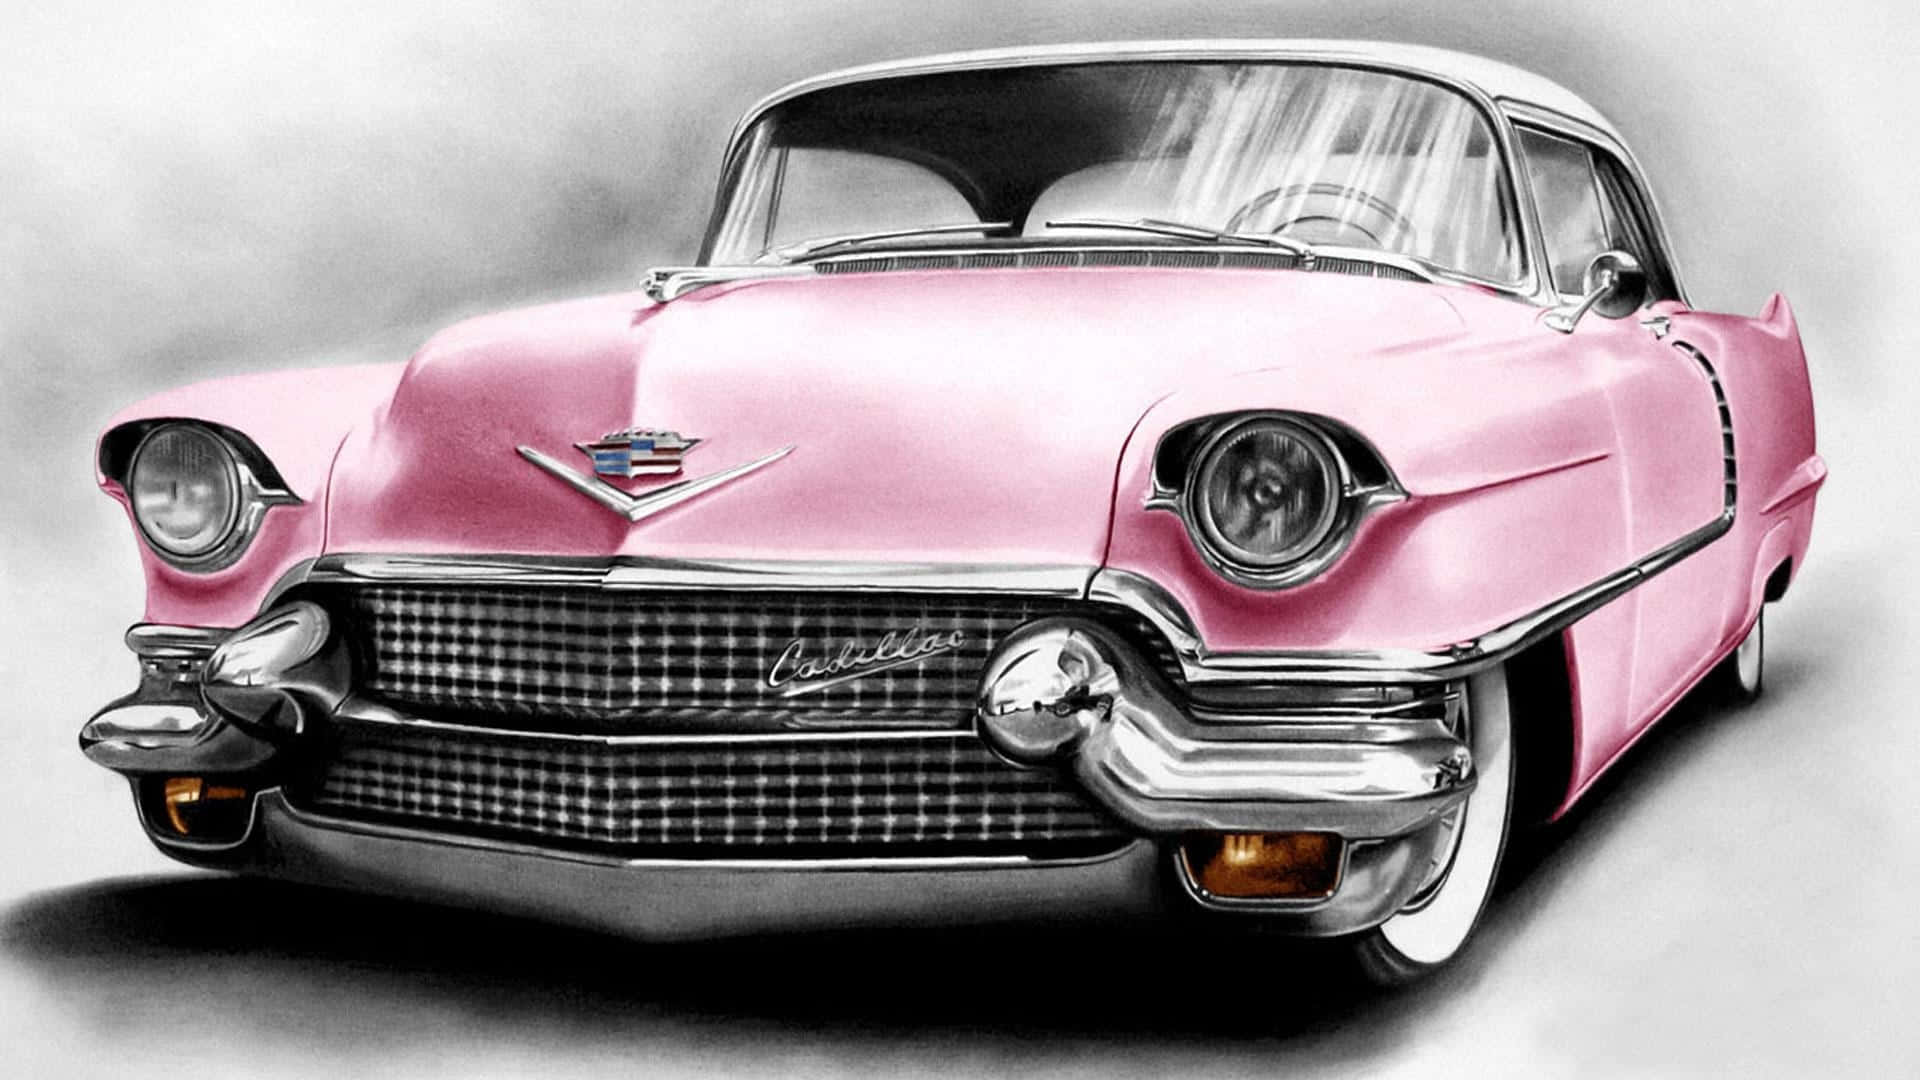 Vintage Pink Cadillac Cruiser in All its Glory Wallpaper